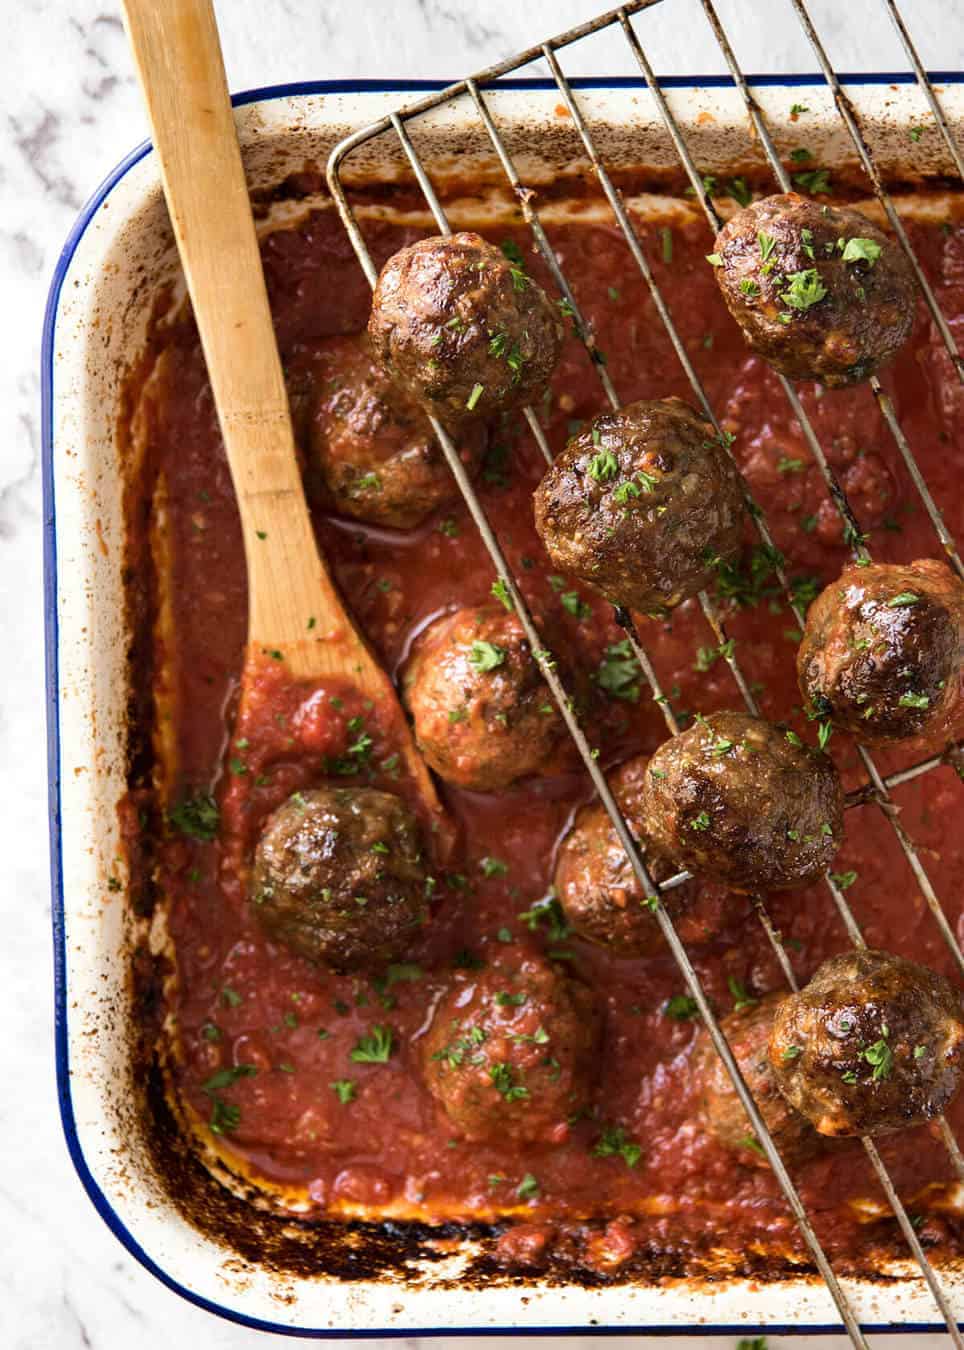 Both the Oven Baked Italian Meatballs AND sauce are made entirely in the oven! The meatballs are extra soft and juicy, and tomato sauce fantastic for pouring over pasta. www.recipetineats.com